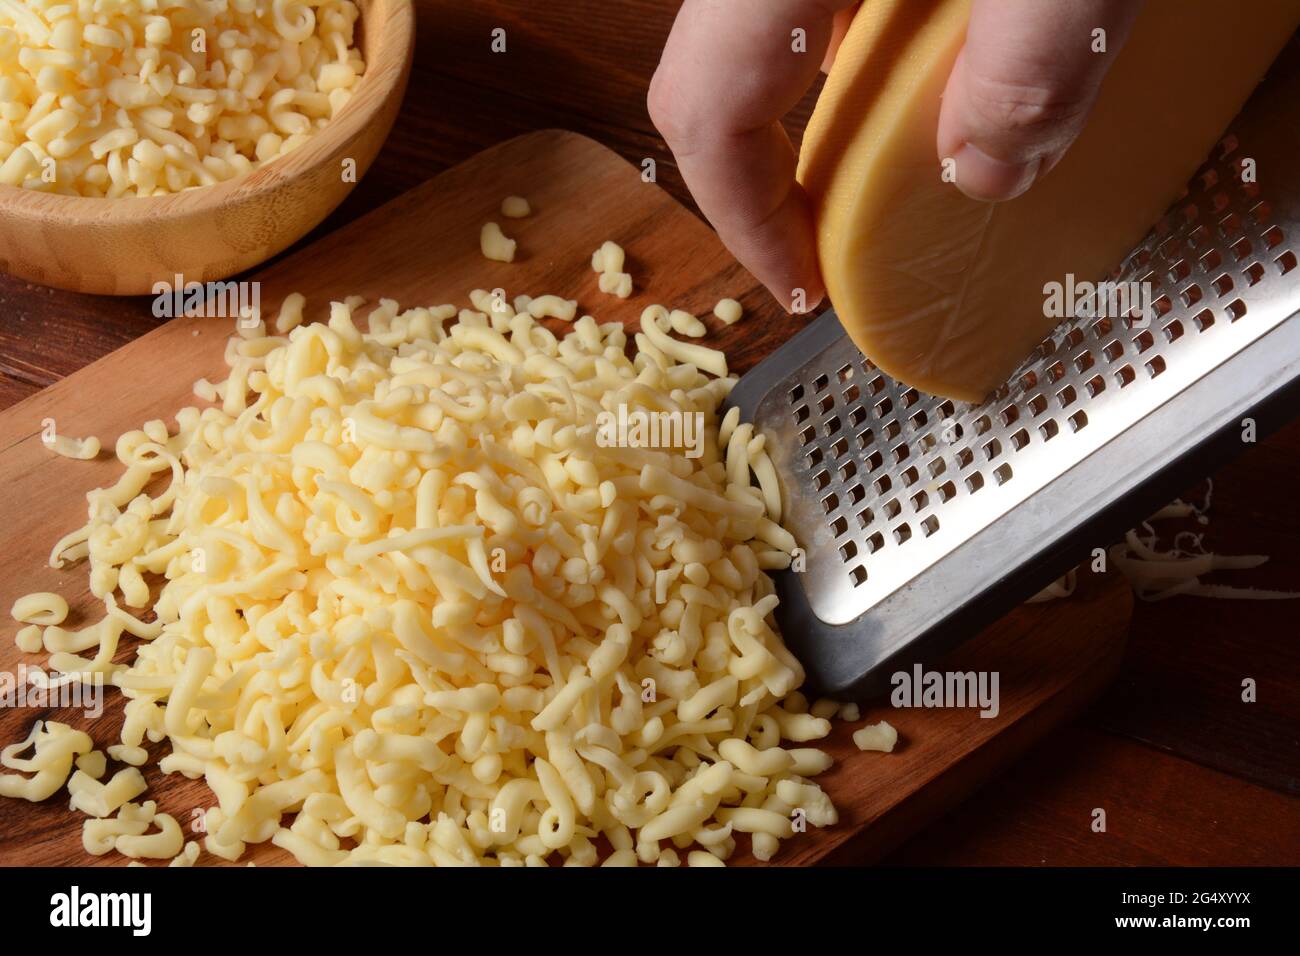 https://c8.alamy.com/comp/2G4XYYX/man-grating-cheese-on-small-wooden-board-grated-cheese-for-cooking-on-a-cutting-board-on-a-wooden-background-2G4XYYX.jpg